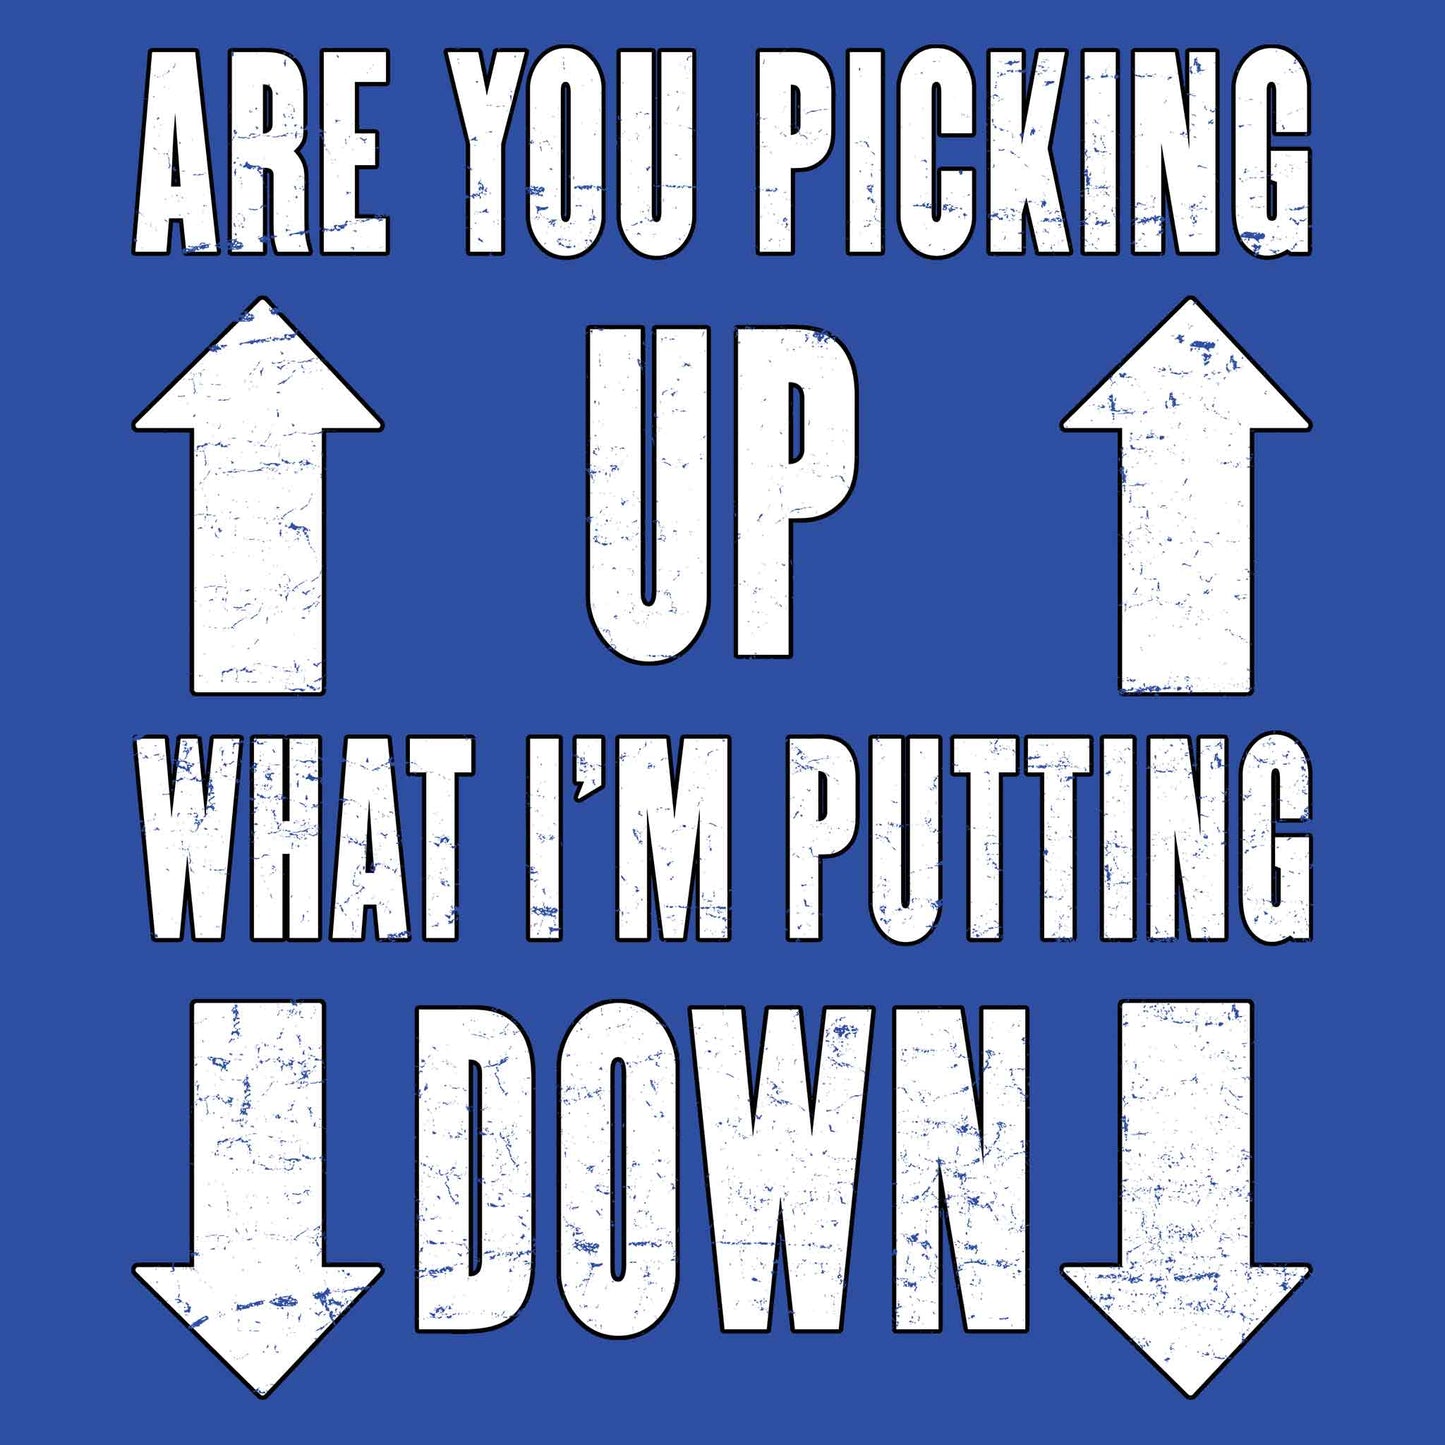 Are You Picking Up What I'm Putting Down T-Shirt